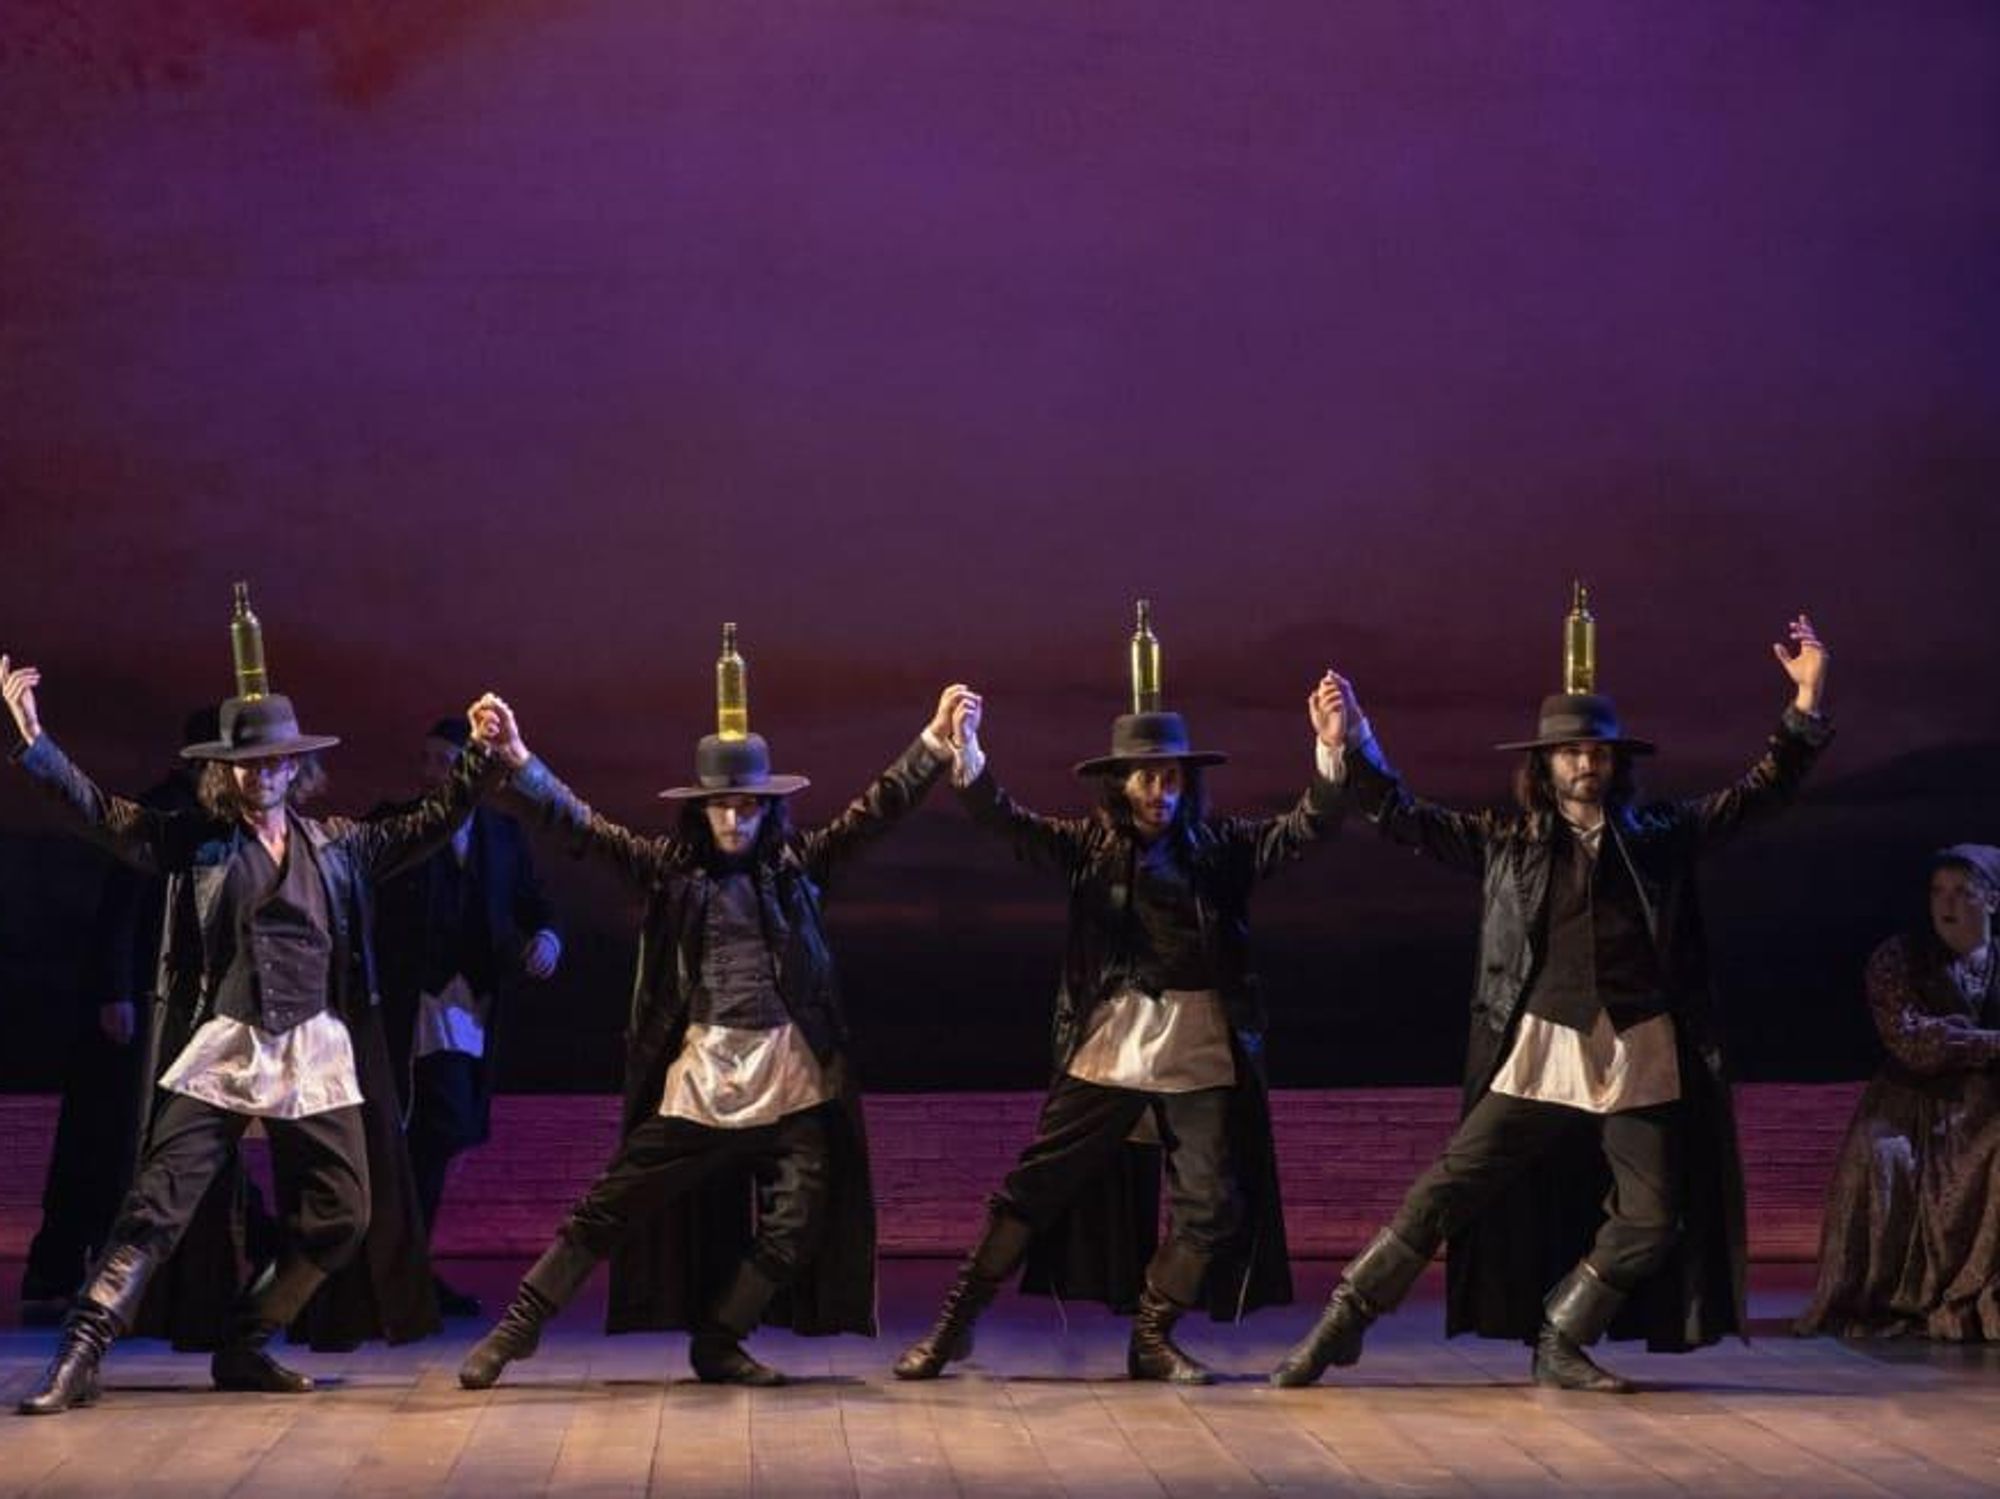 Fiddler on the Roof national tour